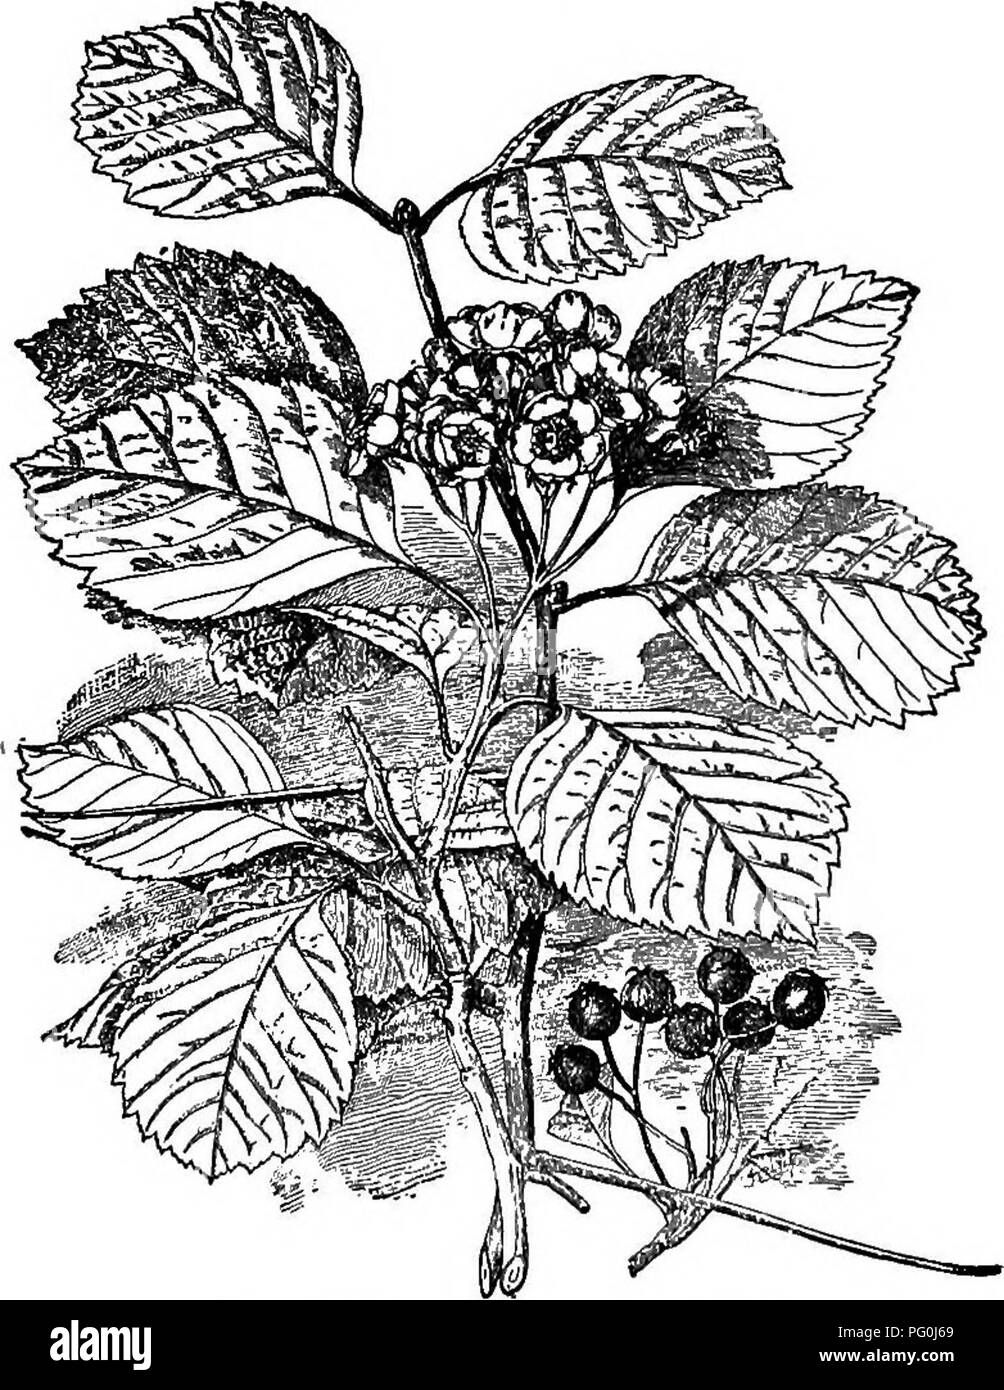 . Cyclopedia of American horticulture, comprising suggestions for cultivation of horticultural plants, descriptions of the species of fruits, vegetables, flowers, and ornamental plants sold in the United States and Canada, together with geographical and biographical sketches. Gardening. 576. Crataegus punctata. lous; fls. fragrant; calyx-teeth glandular-serrate : fr. % in. in diam. May, June. Quebec to Va., west to Mo. and Dak. S.S. 4:181. B.R. 22:1912. L.B.C. 11:1012 (as G. glandulosa). A.G. 11:509. —Sometimes cultivated under the name of C. Douglasi. Var. suocultota, Behd. (C. succuUnta, Sch Stock Photo